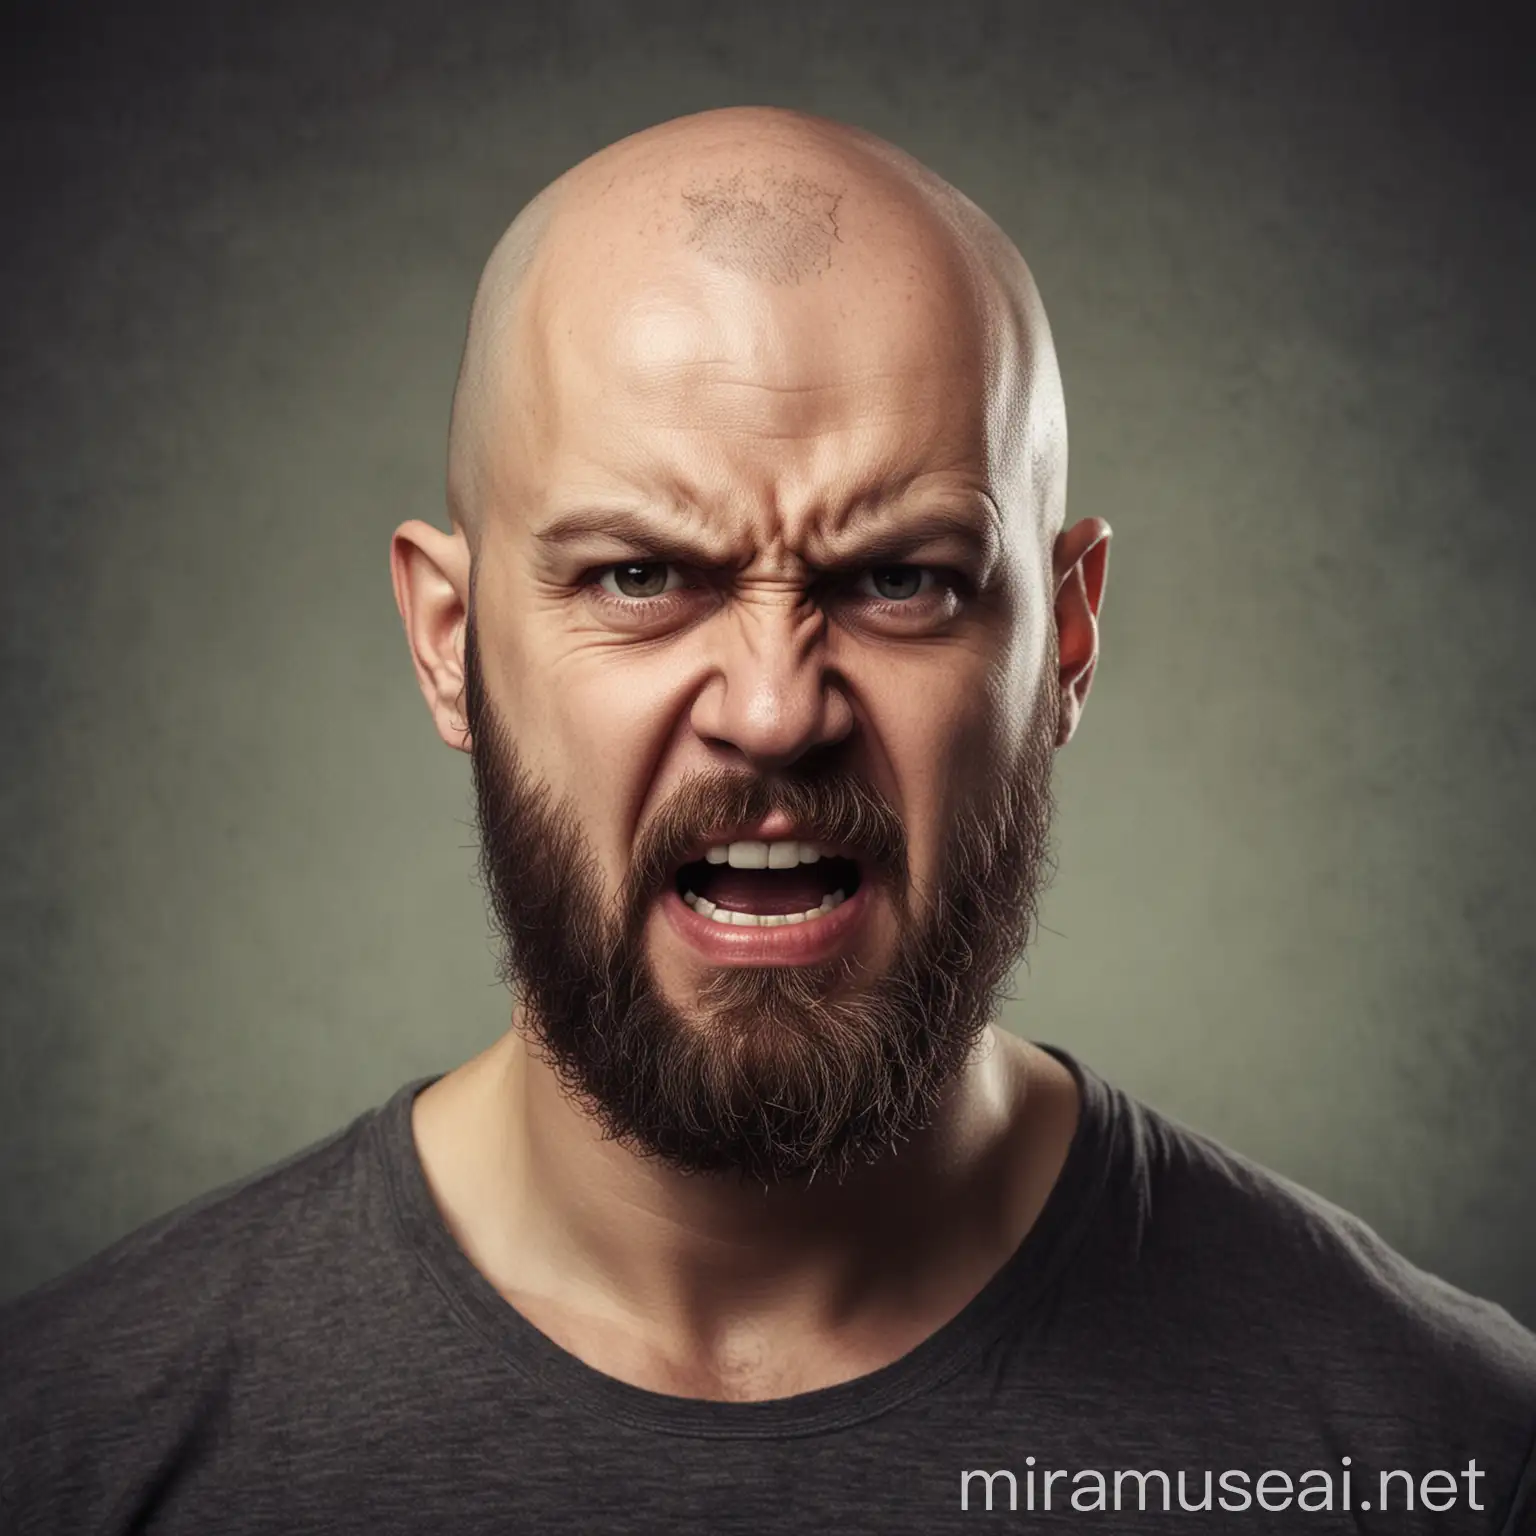 Angry Bearded Bald Man in Dramatic Portrait